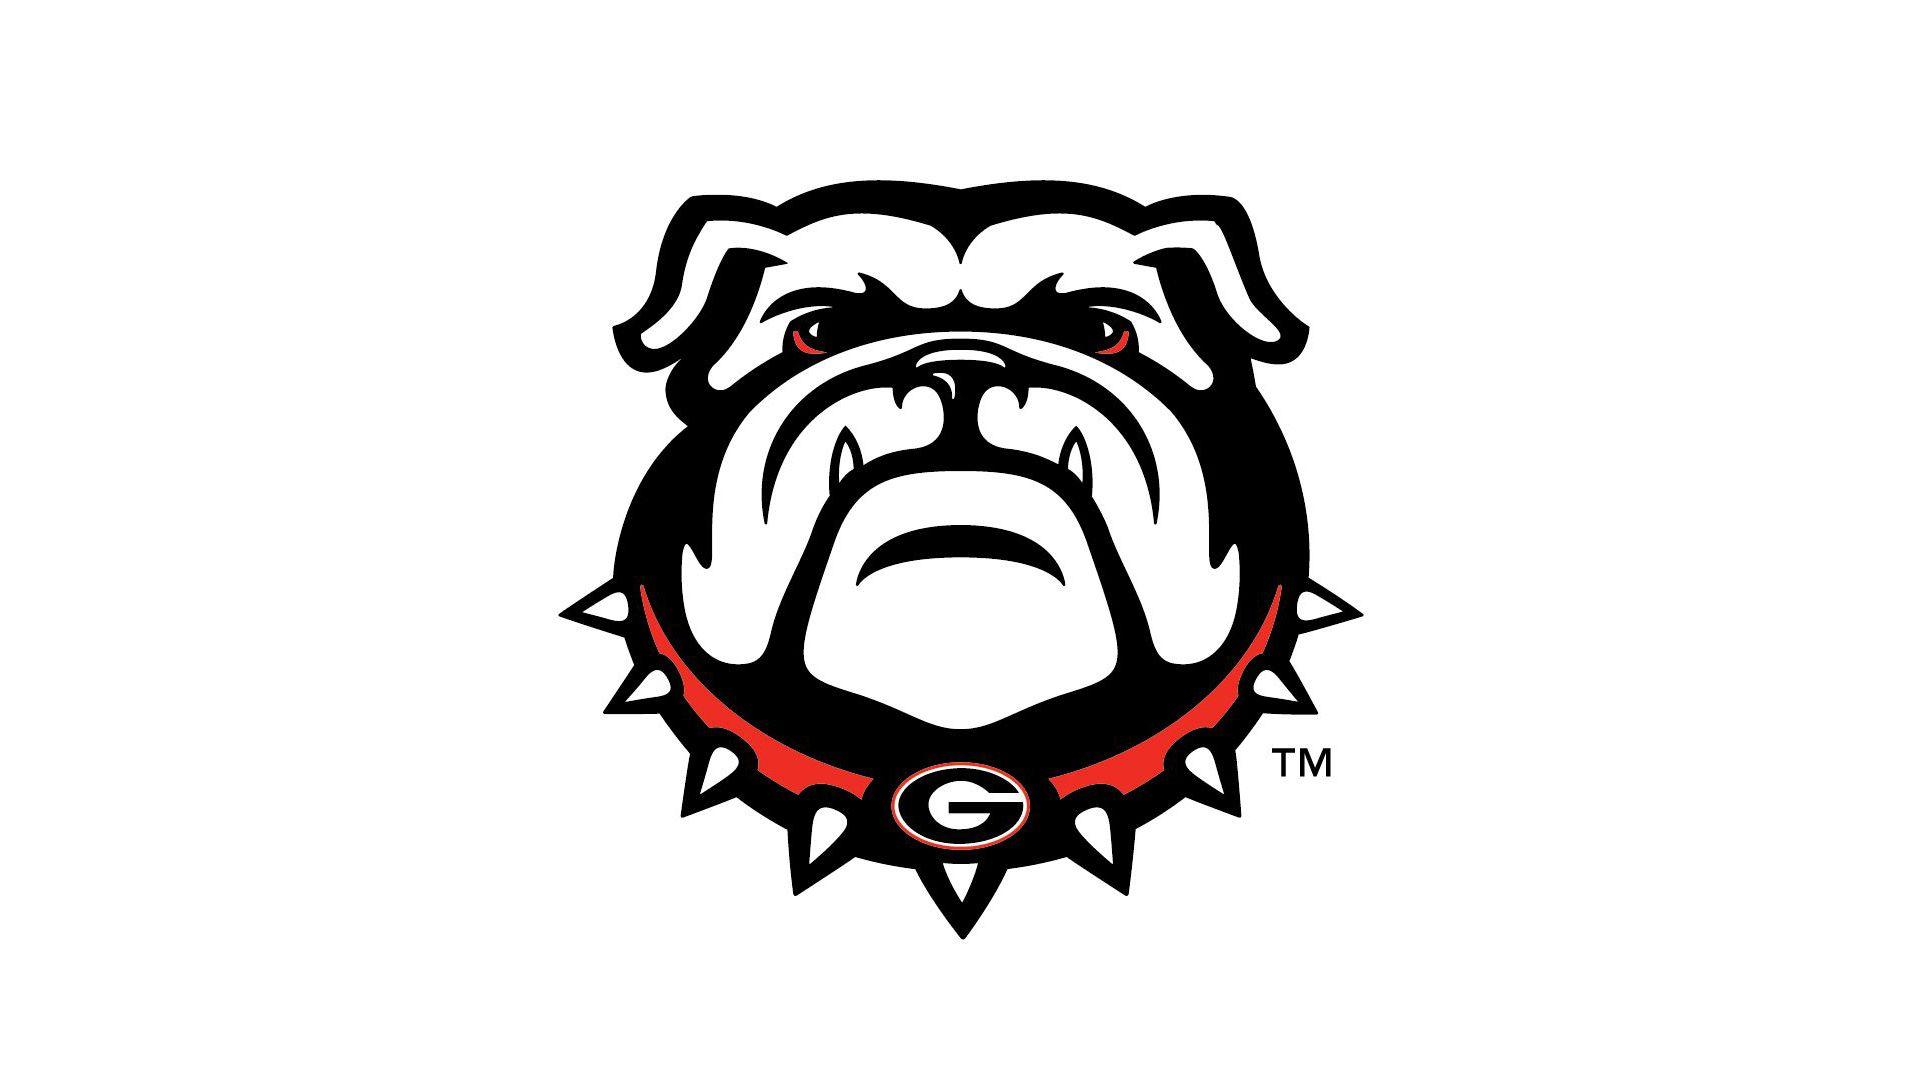 Georgia Bulldogs Logo - Georgia Bulldogs Logo, Georgia Bulldogs Symbol, Meaning, History and ...